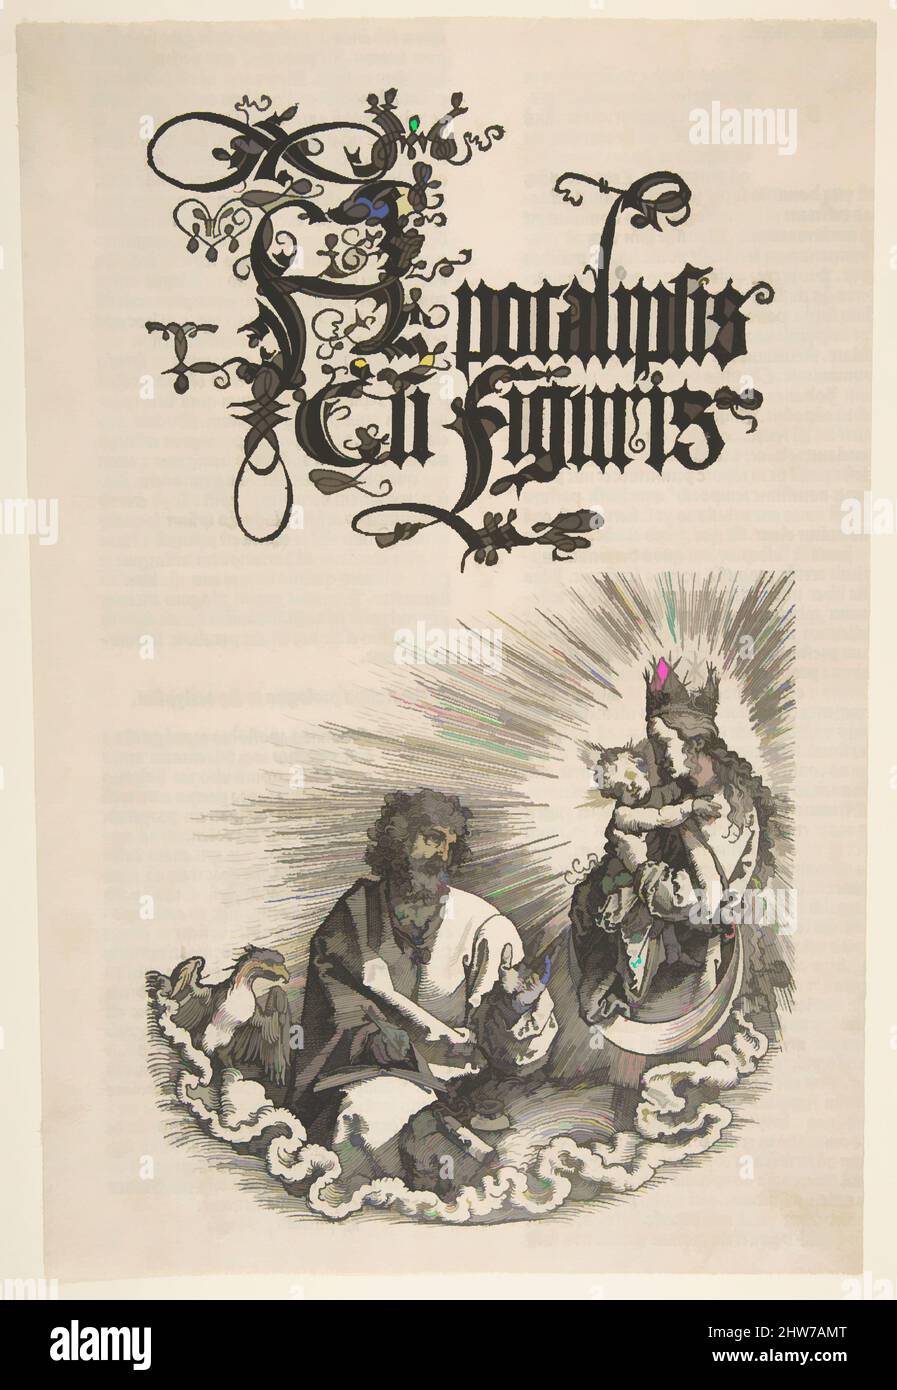 Art inspired by The Virgin and Saint John, from the Apocalypse, 1511, Woodcut, Prints, Albrecht Dürer (German, Nuremberg 1471–1528 Nuremberg, Classic works modernized by Artotop with a splash of modernity. Shapes, color and value, eye-catching visual impact on art. Emotions through freedom of artworks in a contemporary way. A timeless message pursuing a wildly creative new direction. Artists turning to the digital medium and creating the Artotop NFT Stock Photo